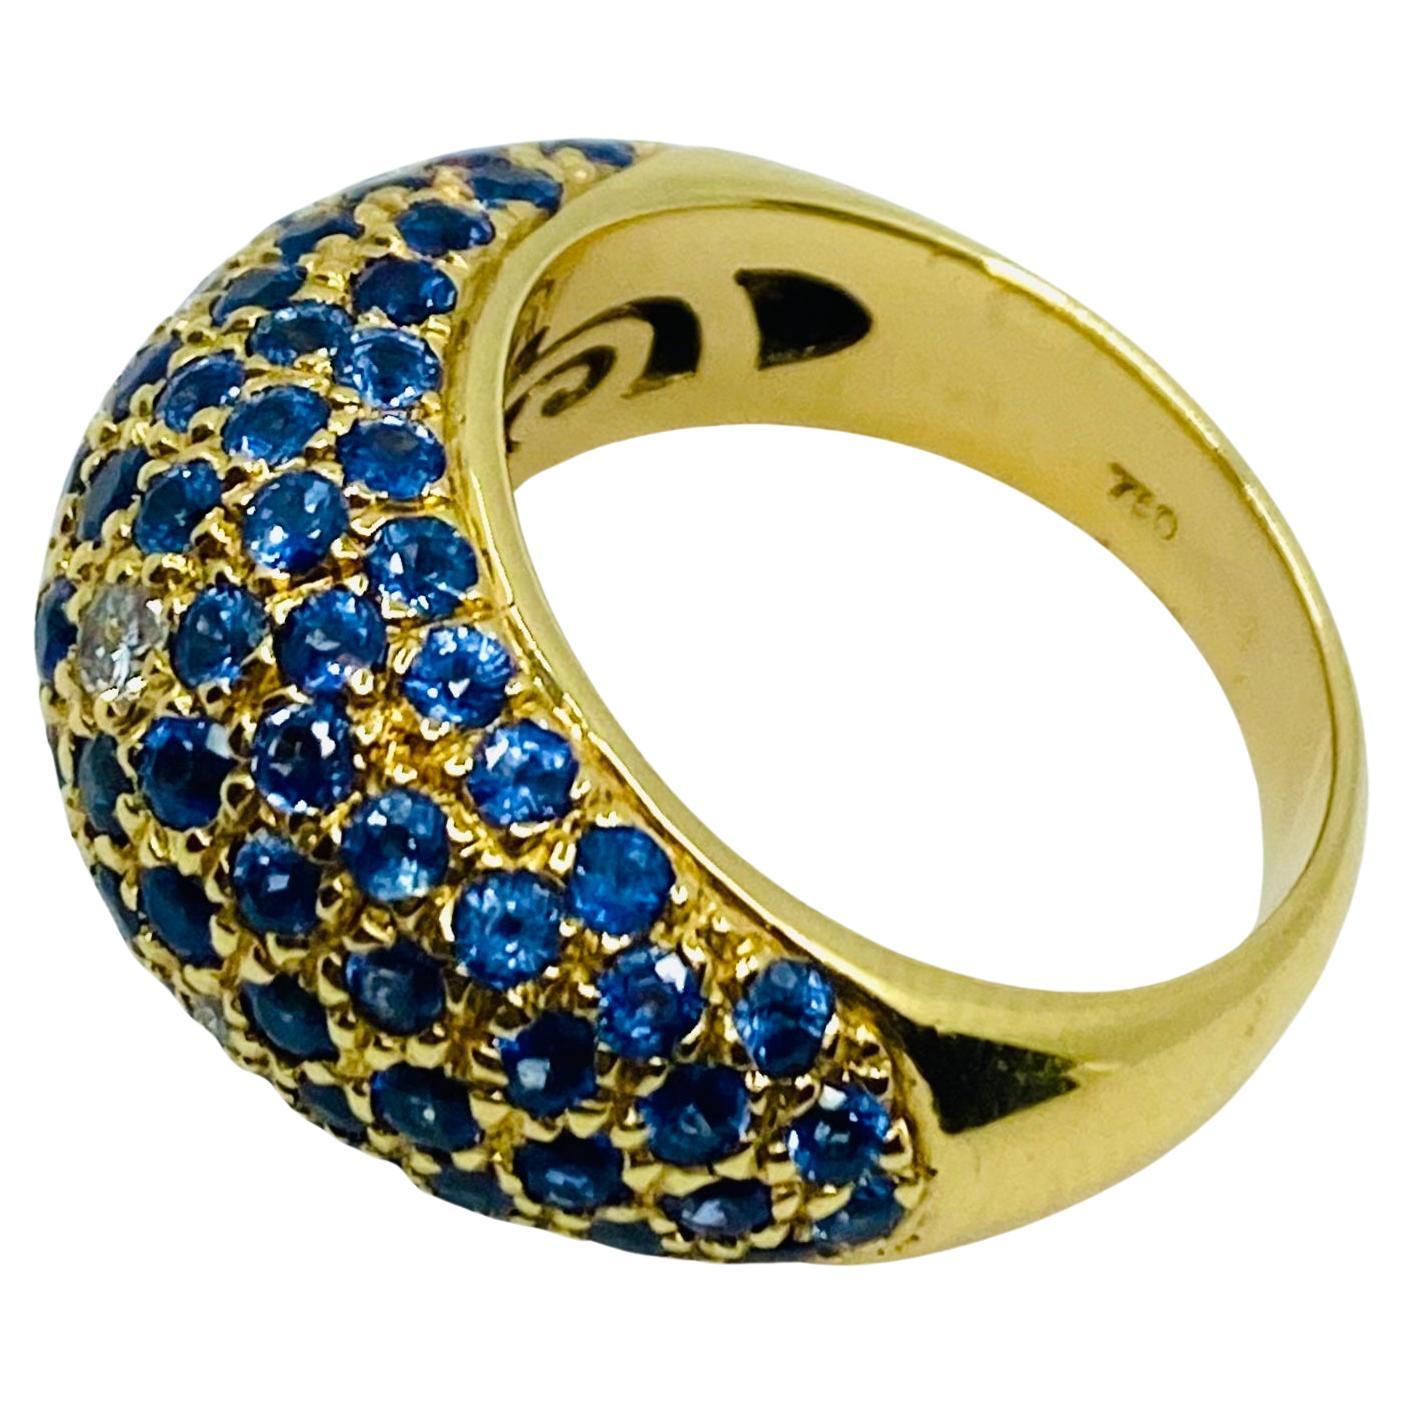 Poiray Gold Sapphire Diamond Dome Ring In Excellent Condition For Sale In Beverly Hills, CA